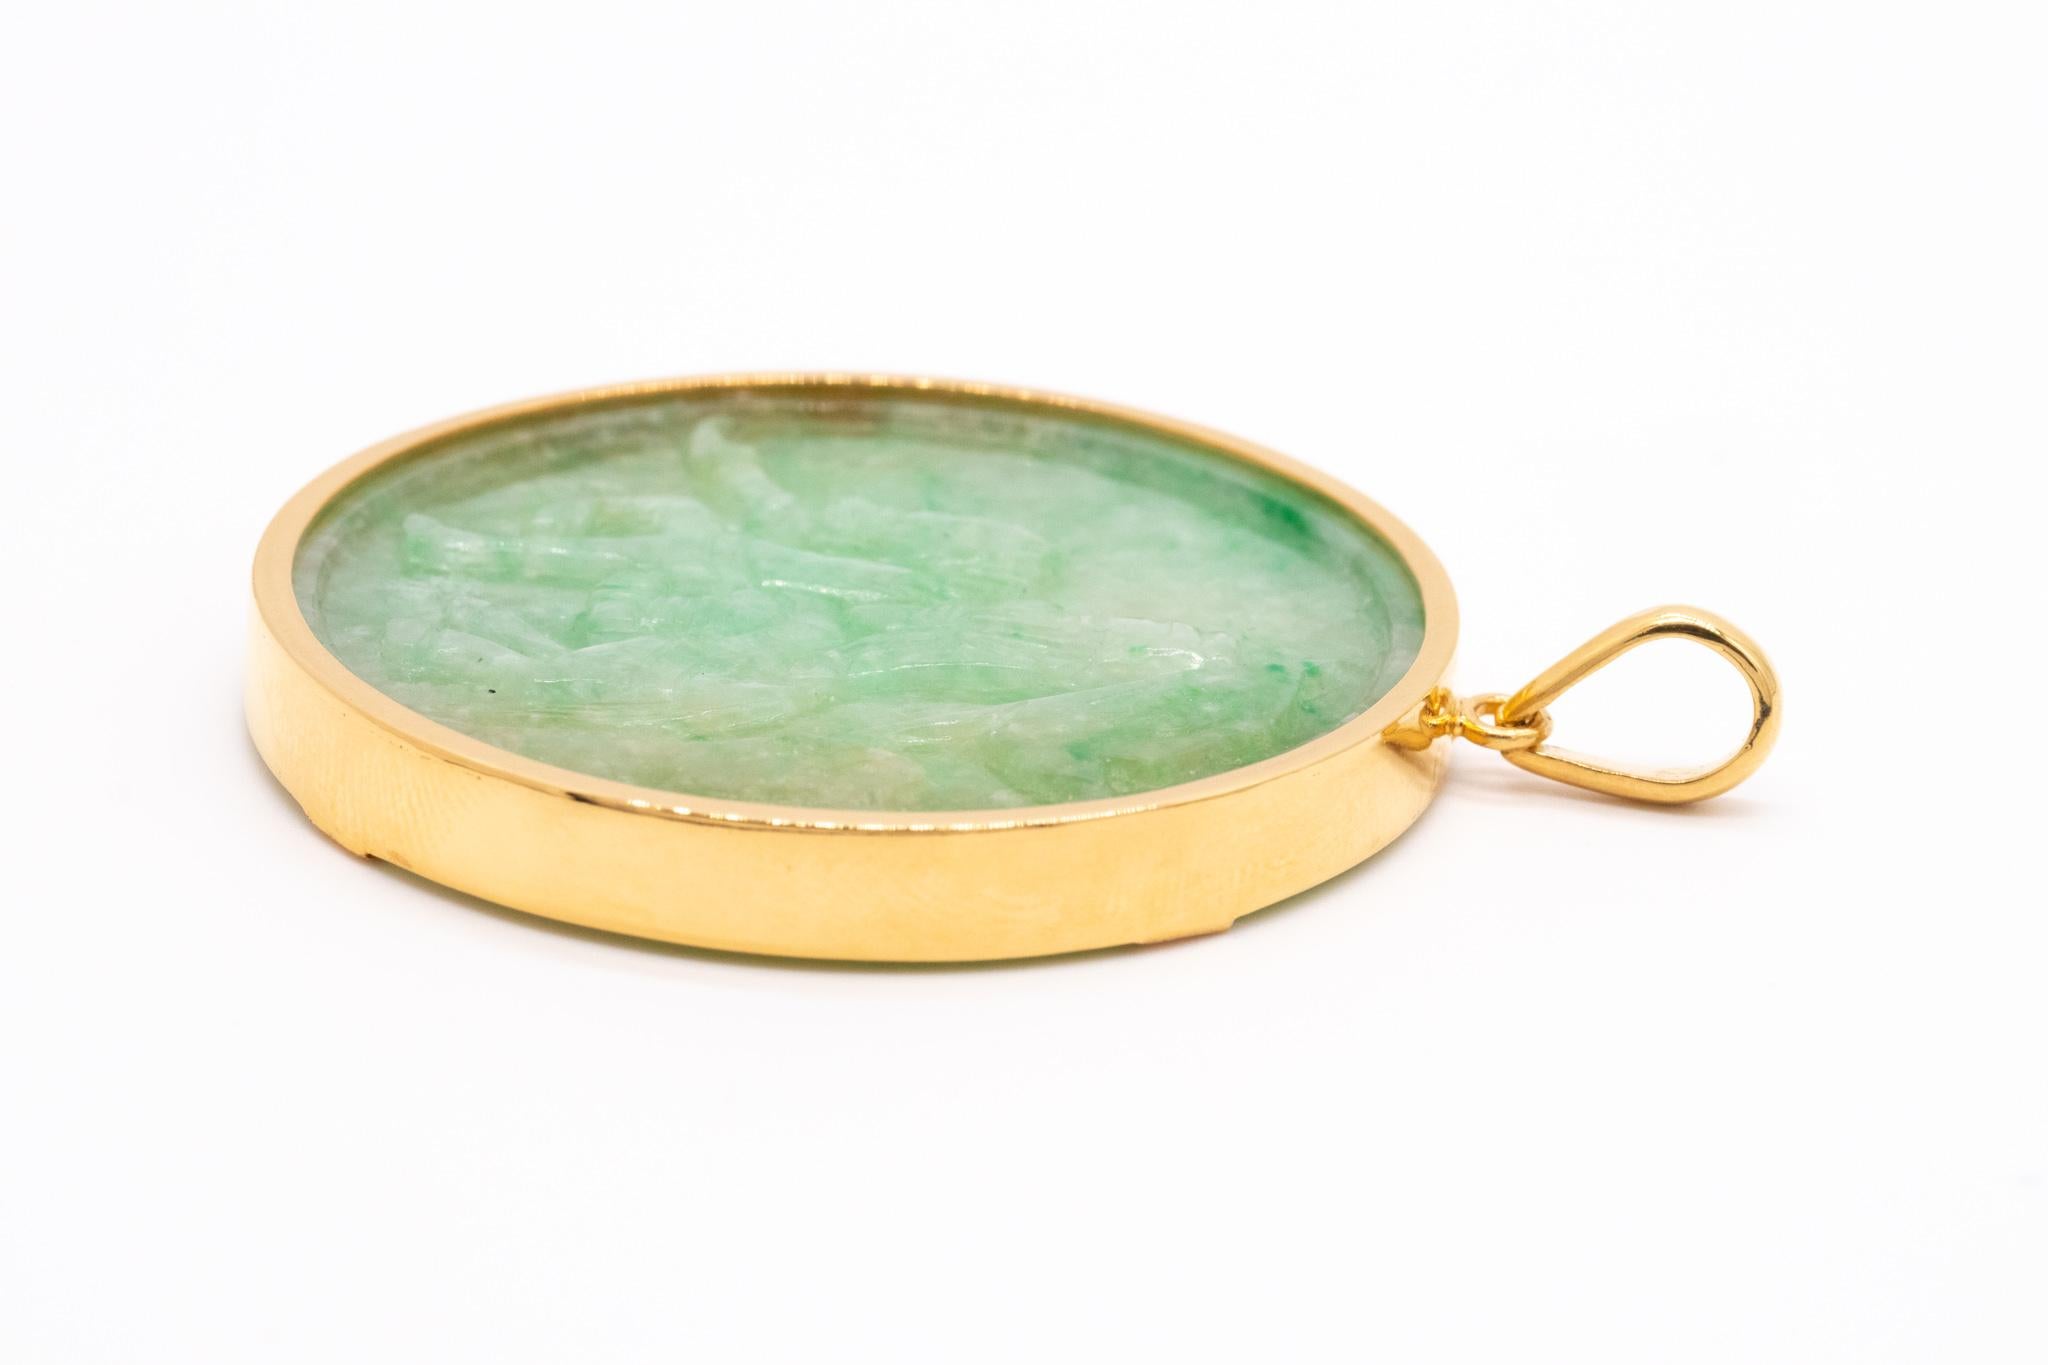 GIA Certified Jadeite Green Jade Pendant in 18Kt Yellow Gold 102.27 Cts Gemstone In Excellent Condition For Sale In Miami, FL